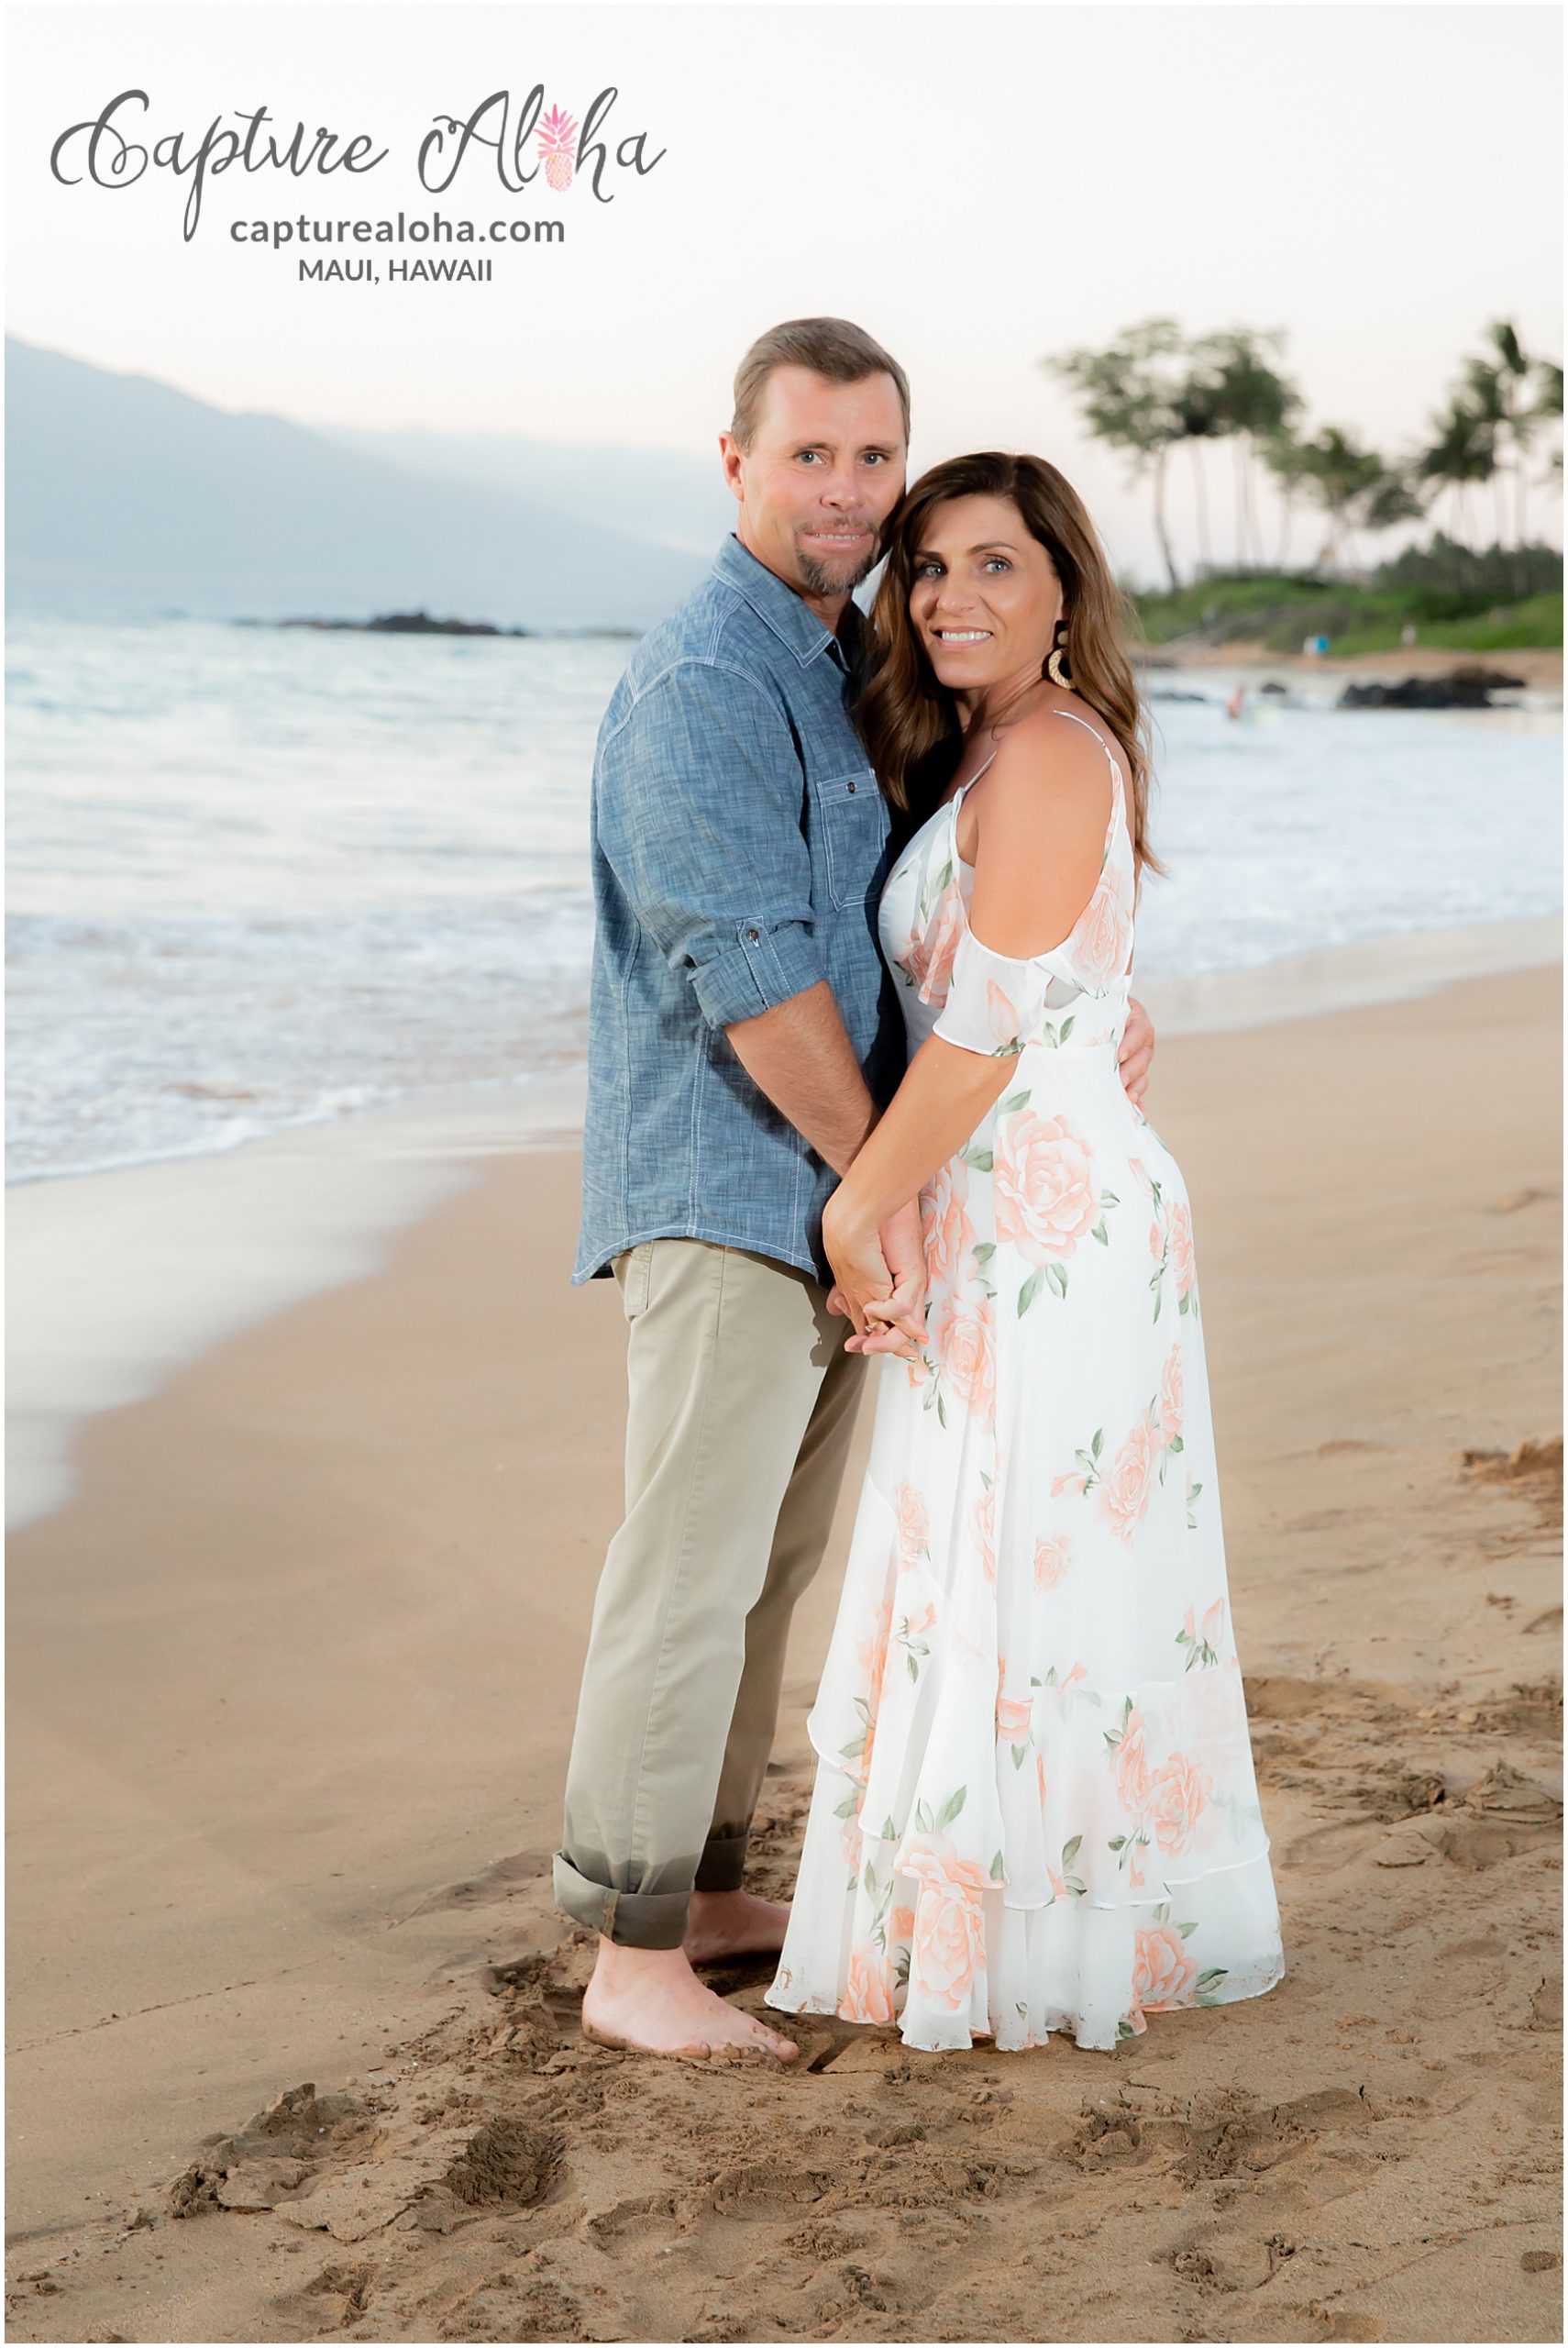 Maui Couples Photography at Mokapu Beach, Maui at sunset with couple holding hands on the beach